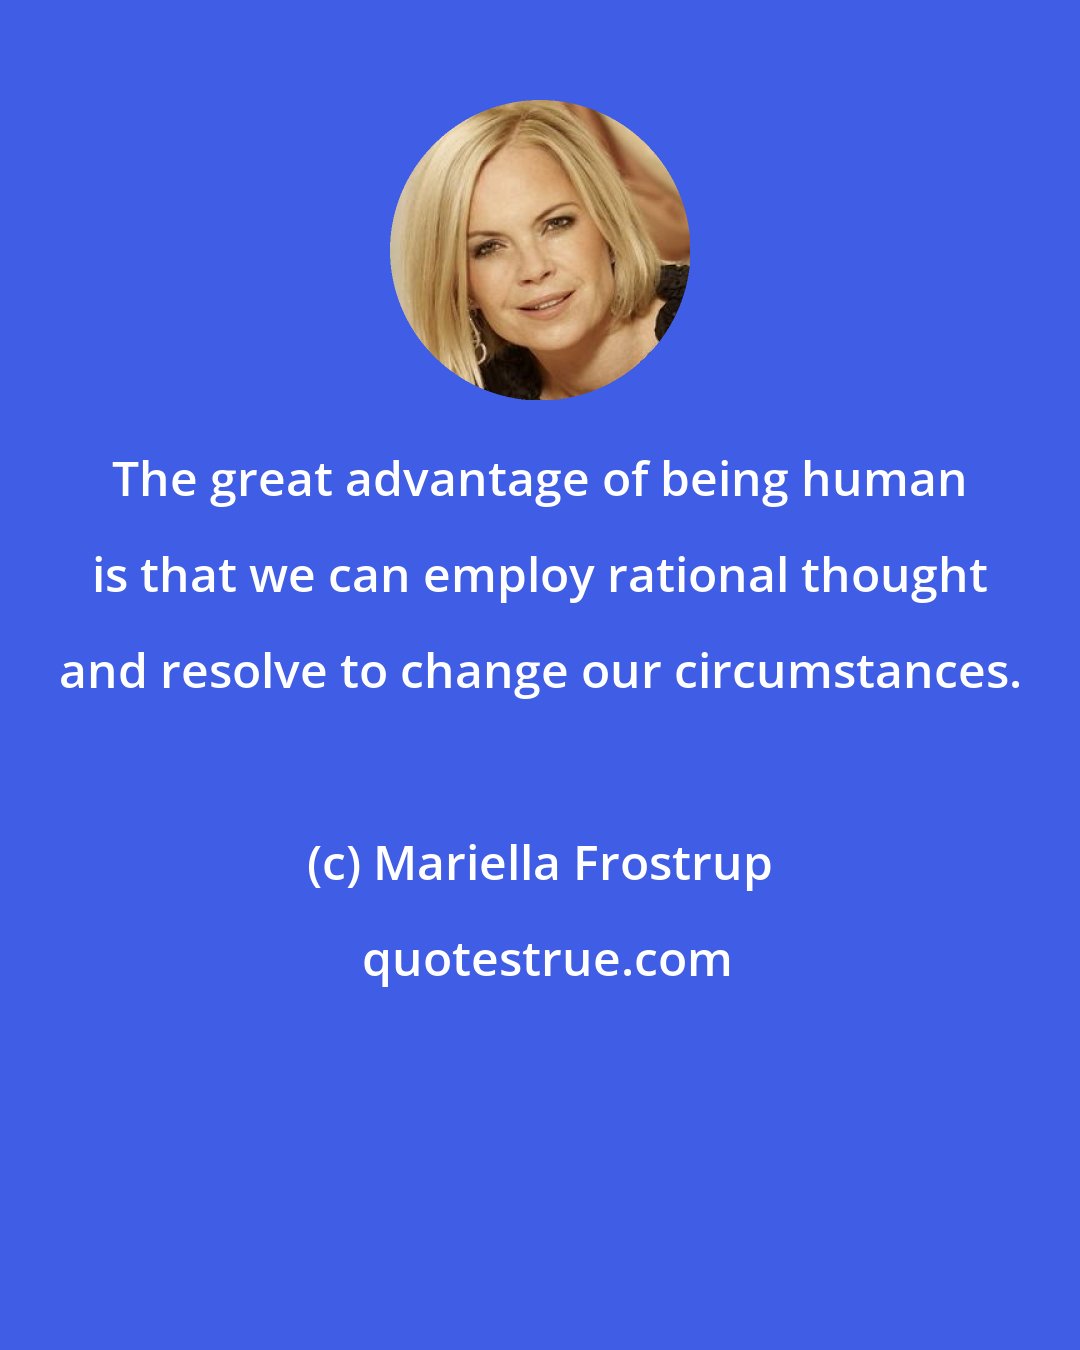 Mariella Frostrup: The great advantage of being human is that we can employ rational thought and resolve to change our circumstances.